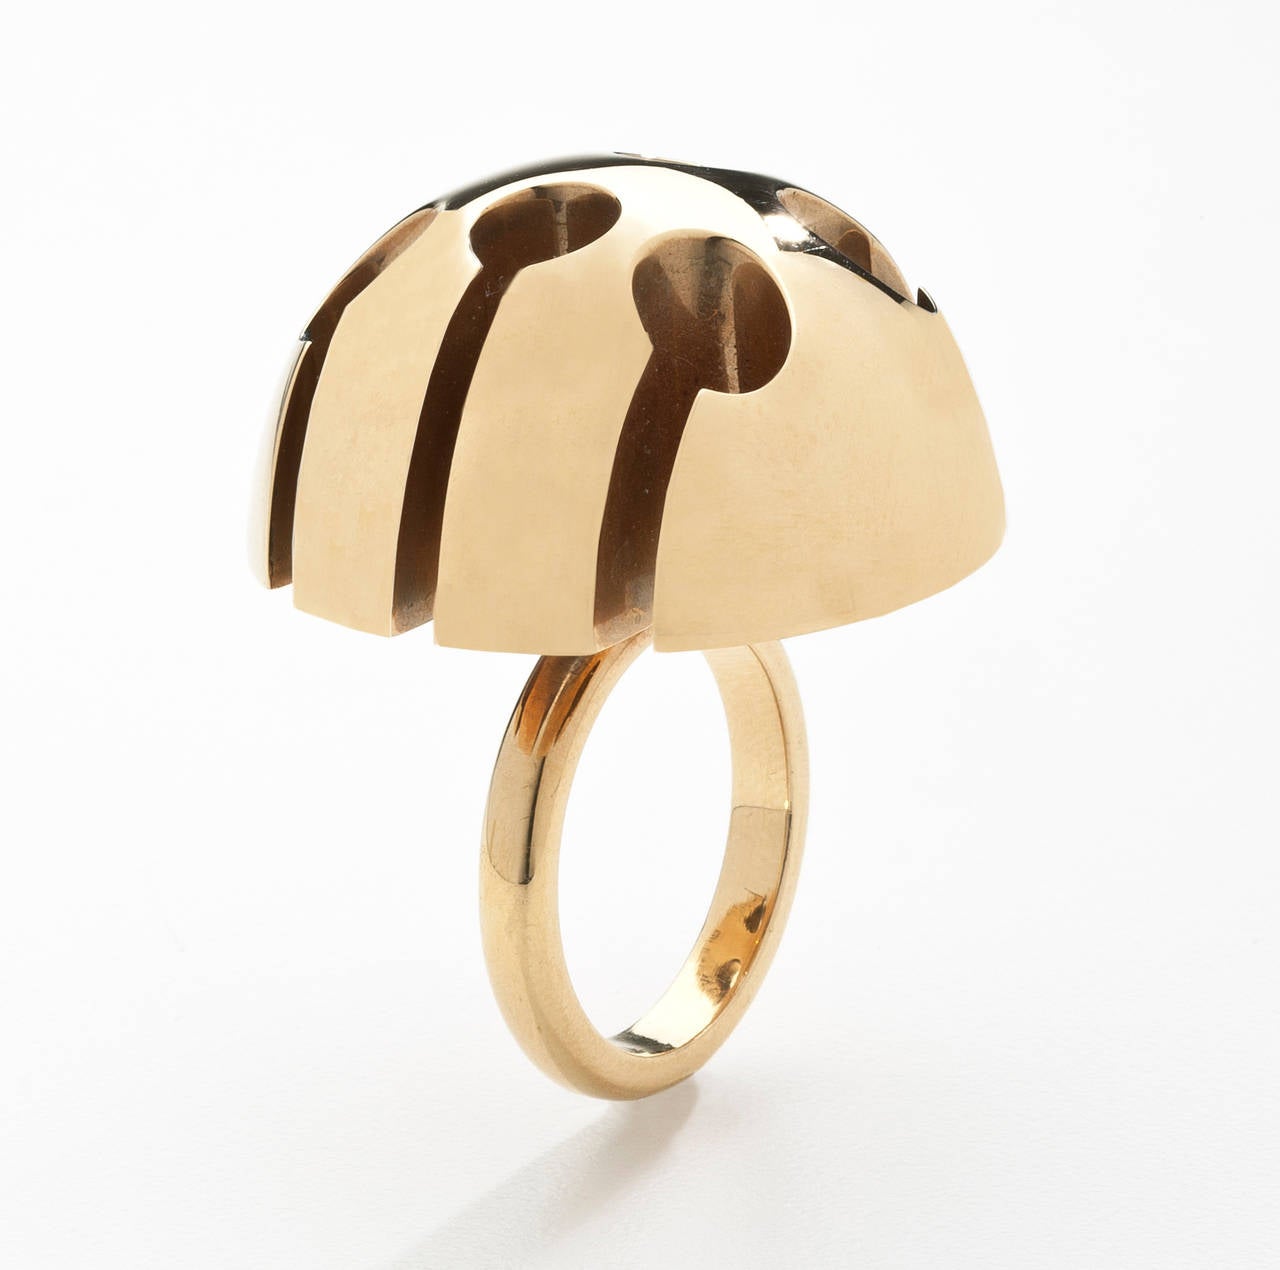 An abstract designed gold ring by Italian sculptor Arnaldo Pomodoro (born 1926).  The 18 karat gold ring is a large demi sphere that looks like a photo of the surface of the moon.   The piece was originally part of the jewelry collection